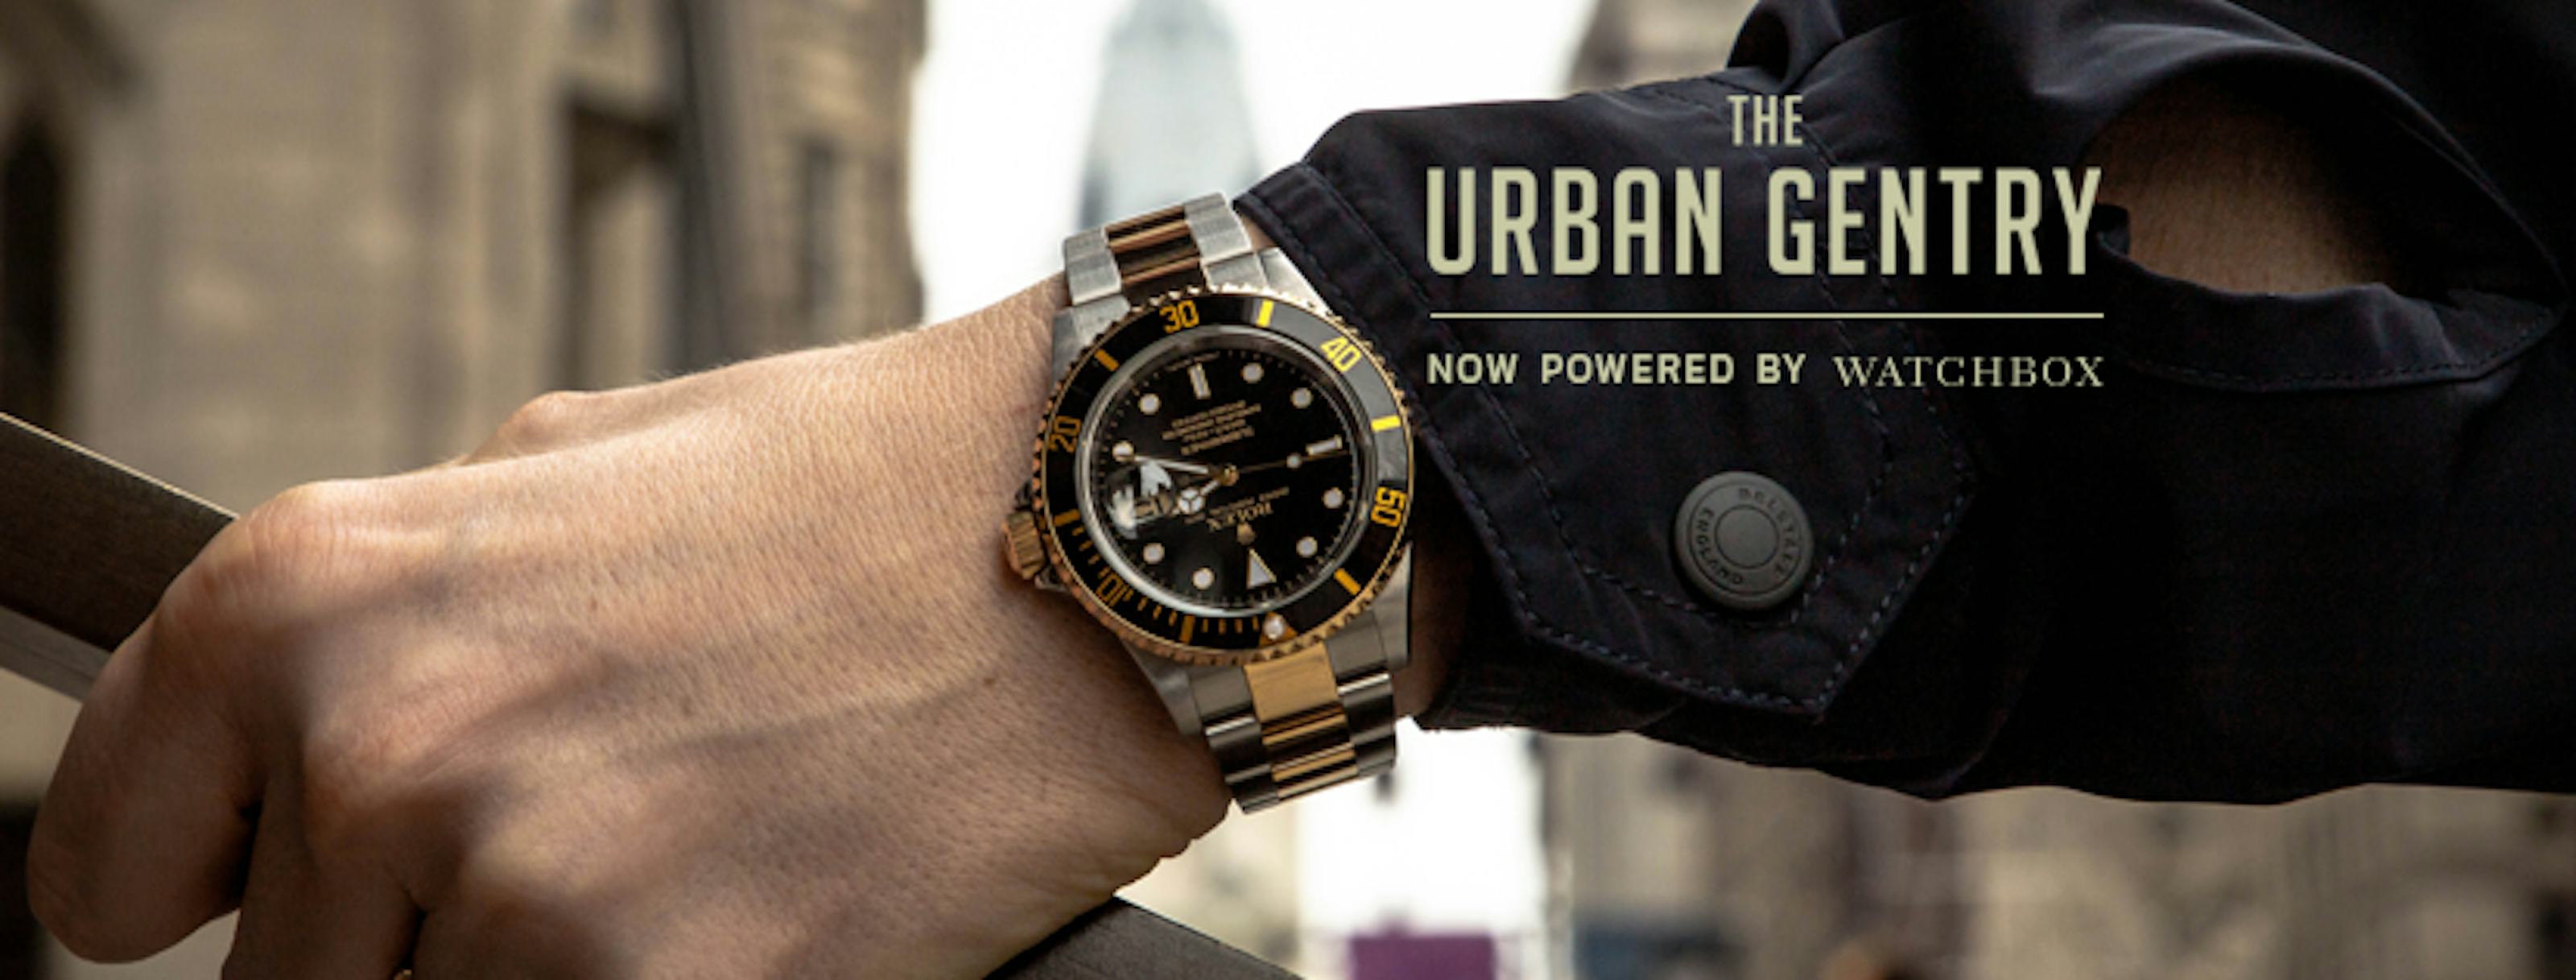 The Urban Gentry Is Now Powered By WatchBox